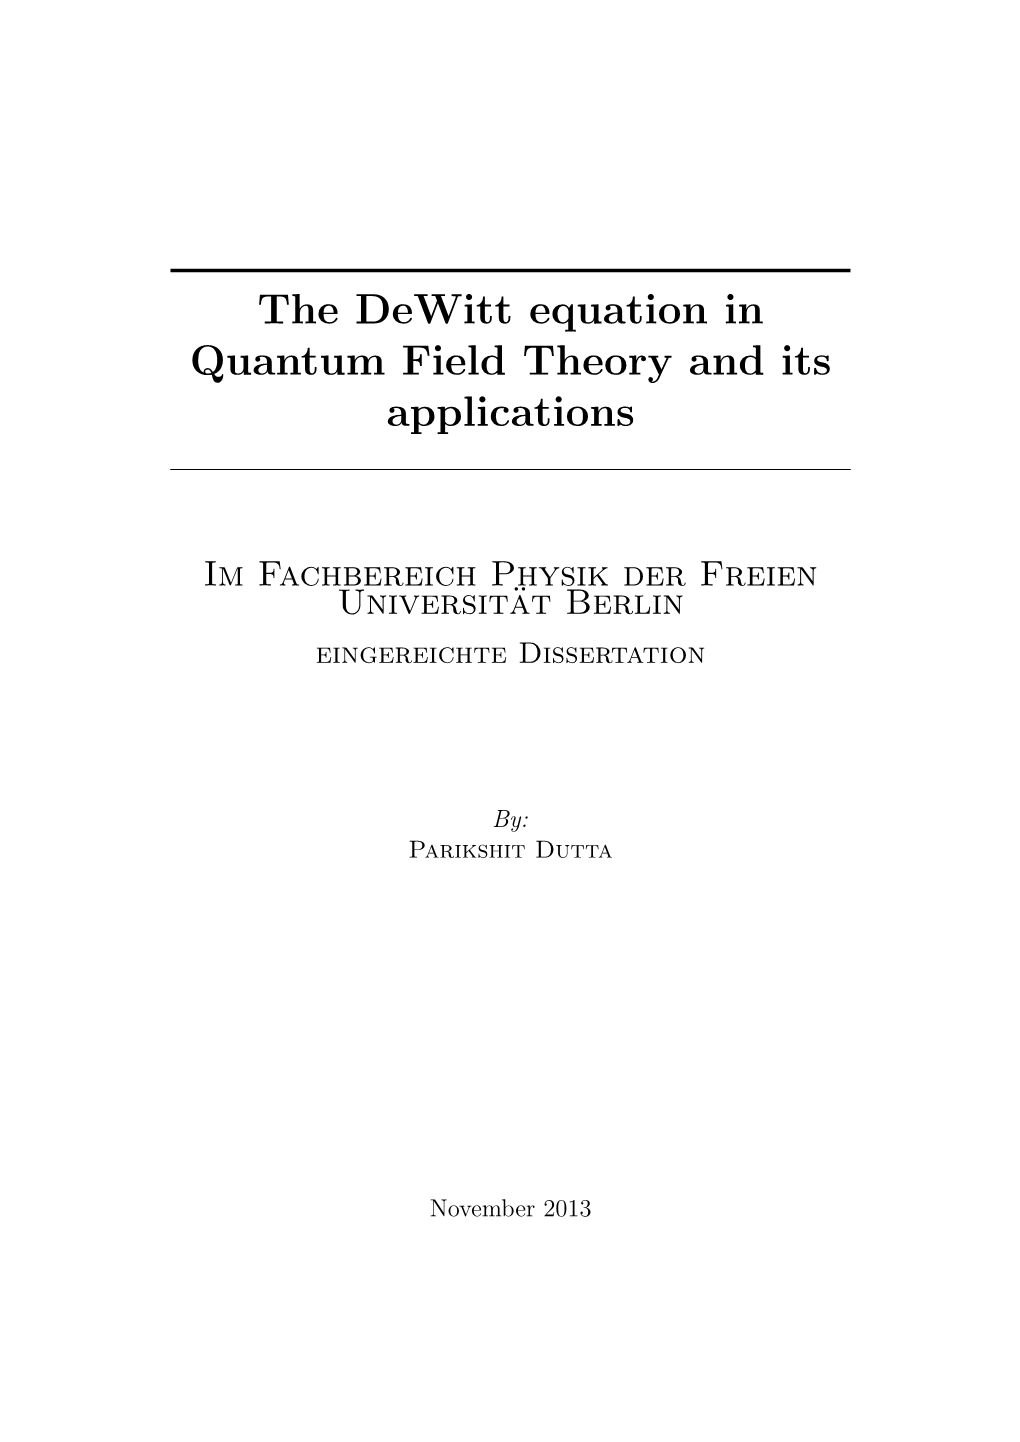 The Dewitt Equation in Quantum Field Theory and Its Applications